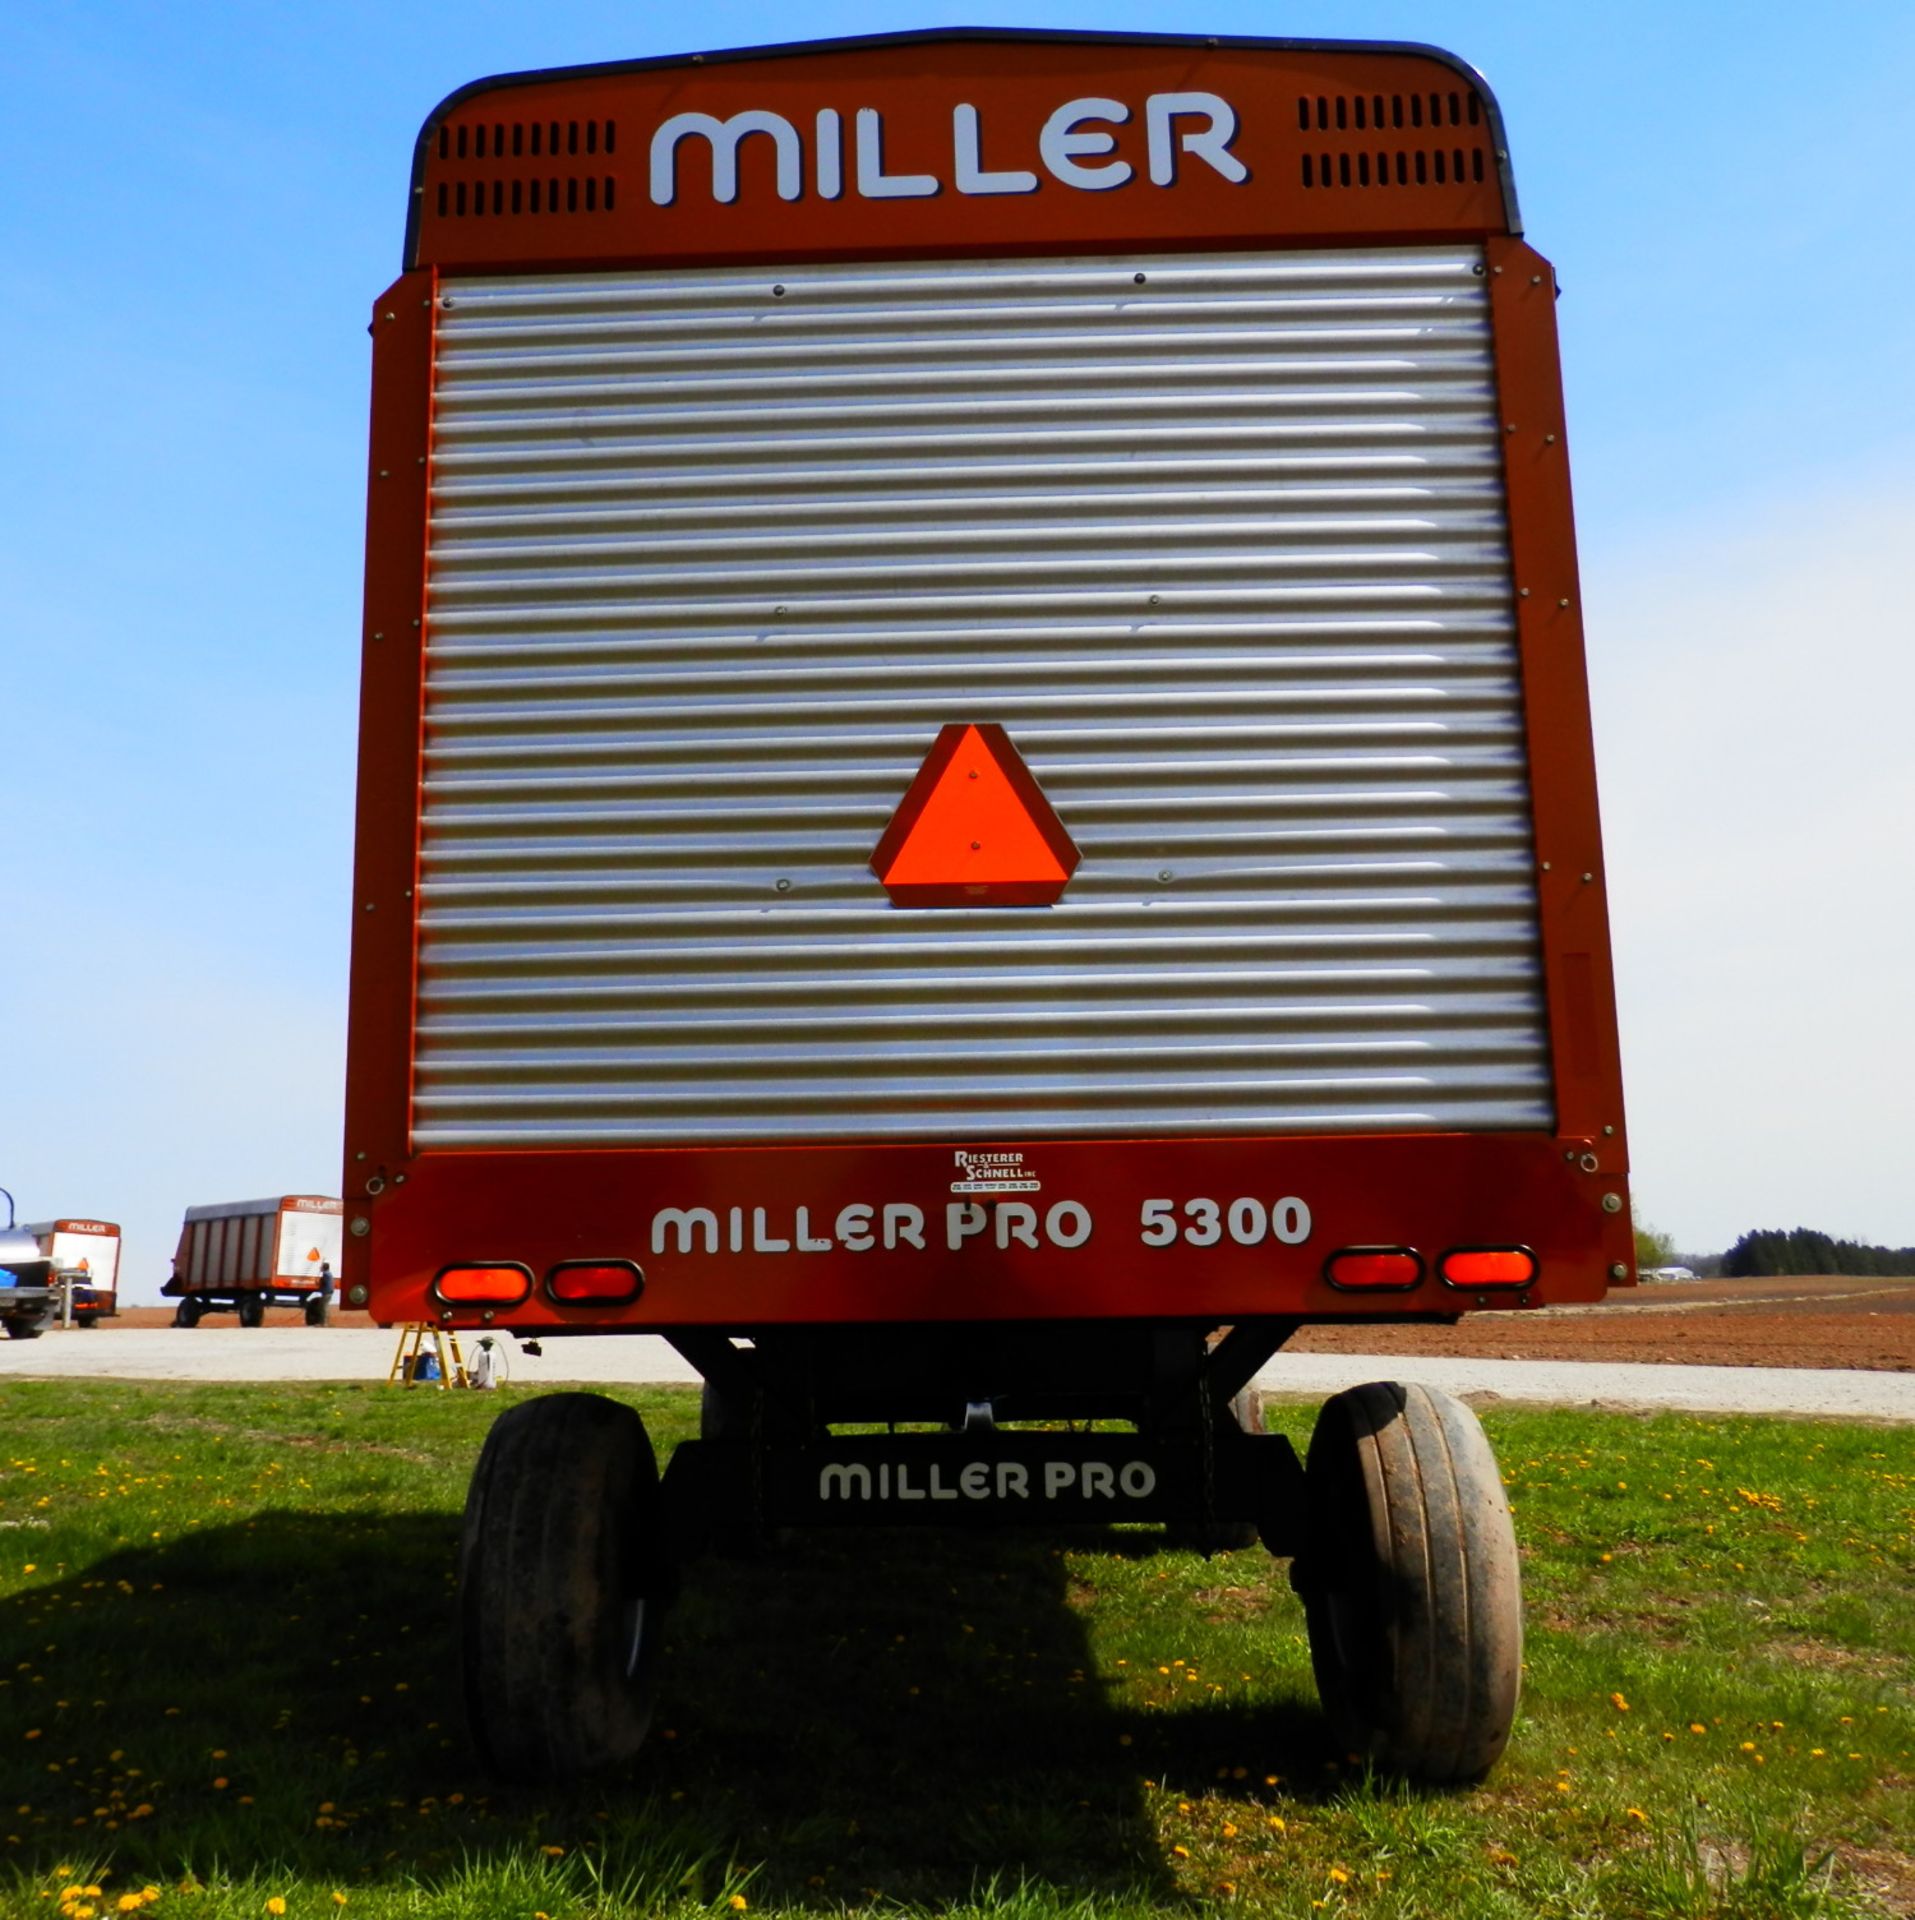 MILLER PRO 5300 18' LH FORAGE WAGON (White decal) - Image 6 of 8